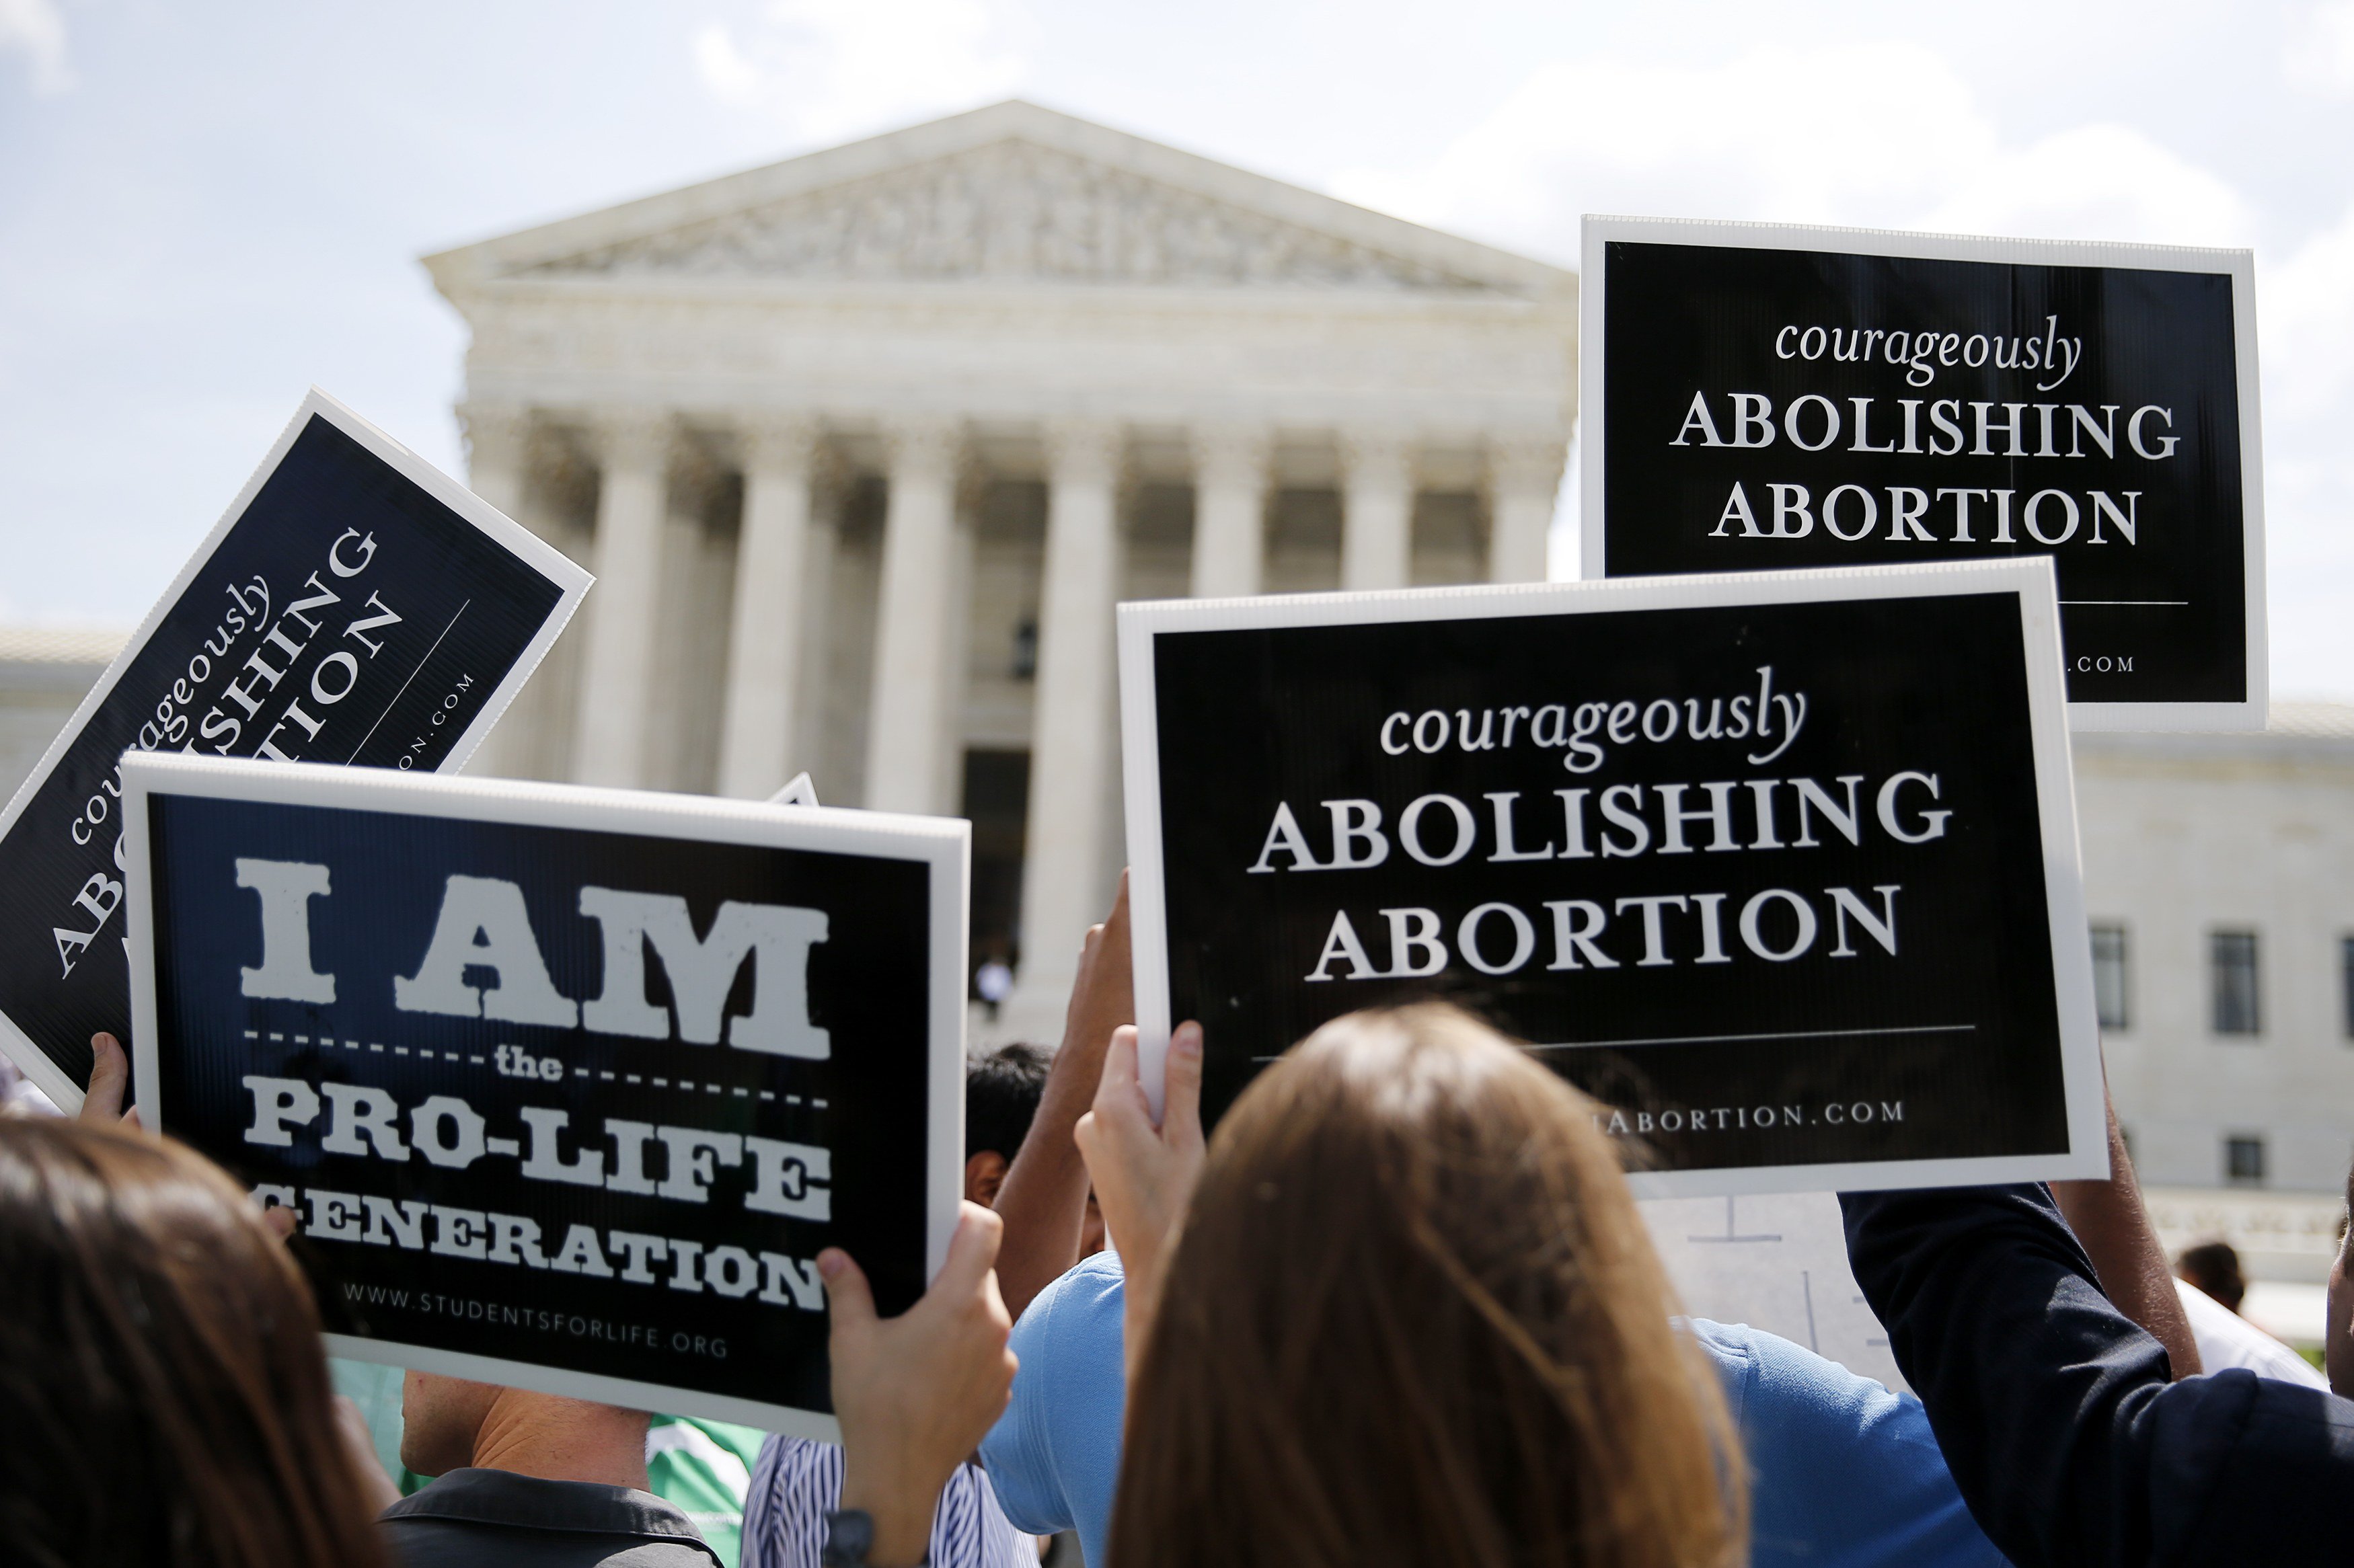 Anti-abortion protestors hold up signs as they celebrate U.S. Supreme Court ruling against protective buffer zones around abortion clinics, outside the Court in Washington